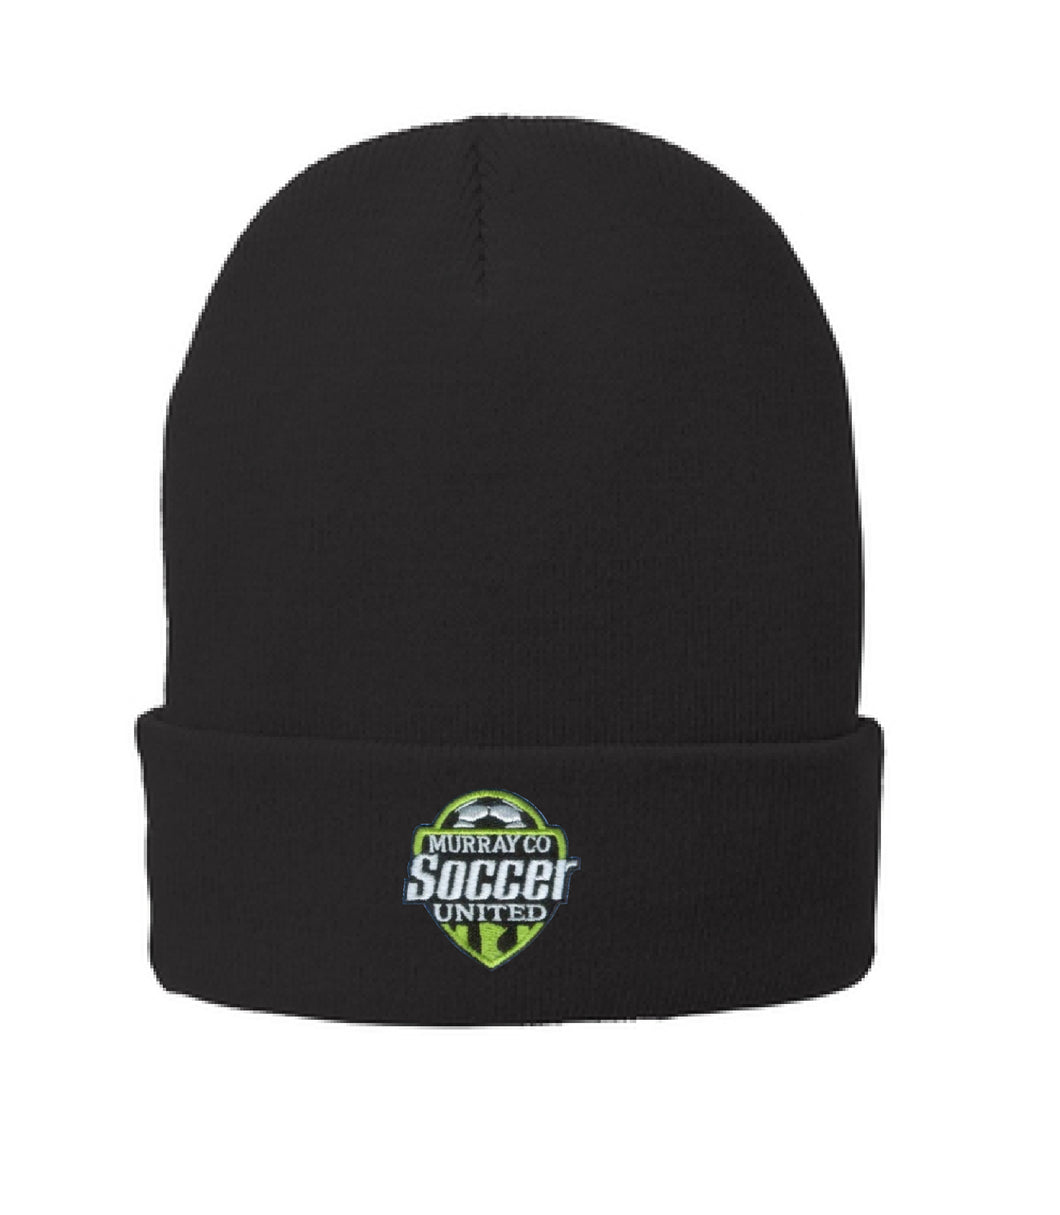 MURRAY COUNTY SOCCER UNITED  FLEECE LINED HAT